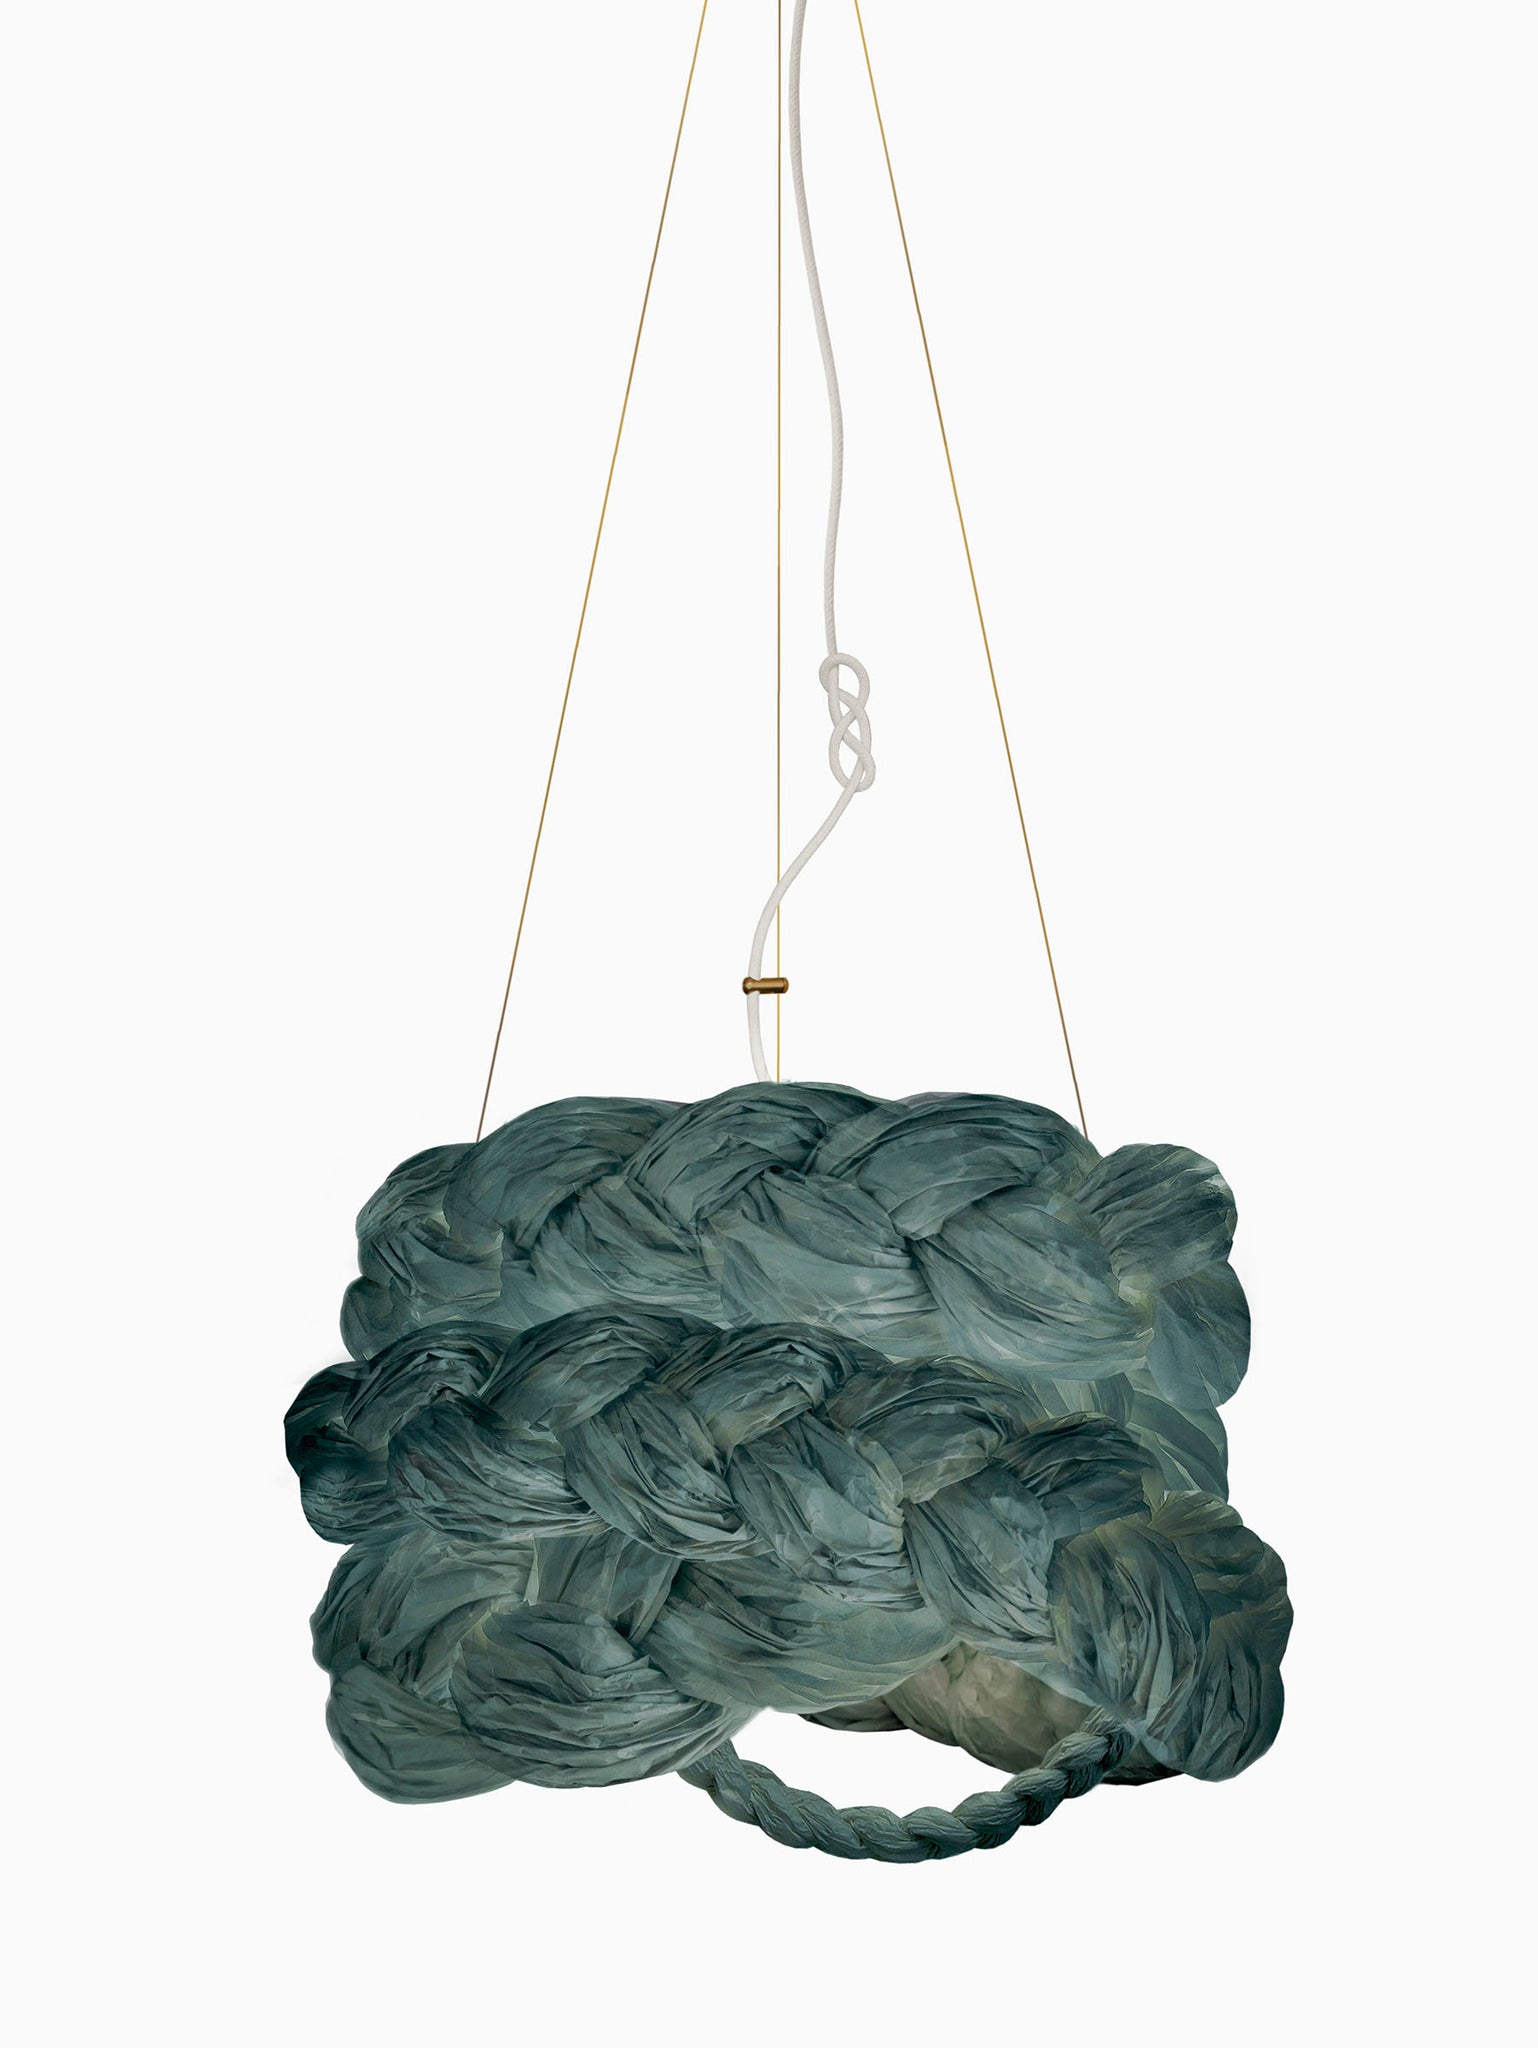 Turquoise Paper Braided Unique Handmade Pendant Lamp | Cozy Atmosphere Lighting | Contemporary Natural Lighting for Living room,  Bedroom & Lobby | Sustainable Design Lighting | baby & kids room lighting | mammalampa The Bride suspension lamp M